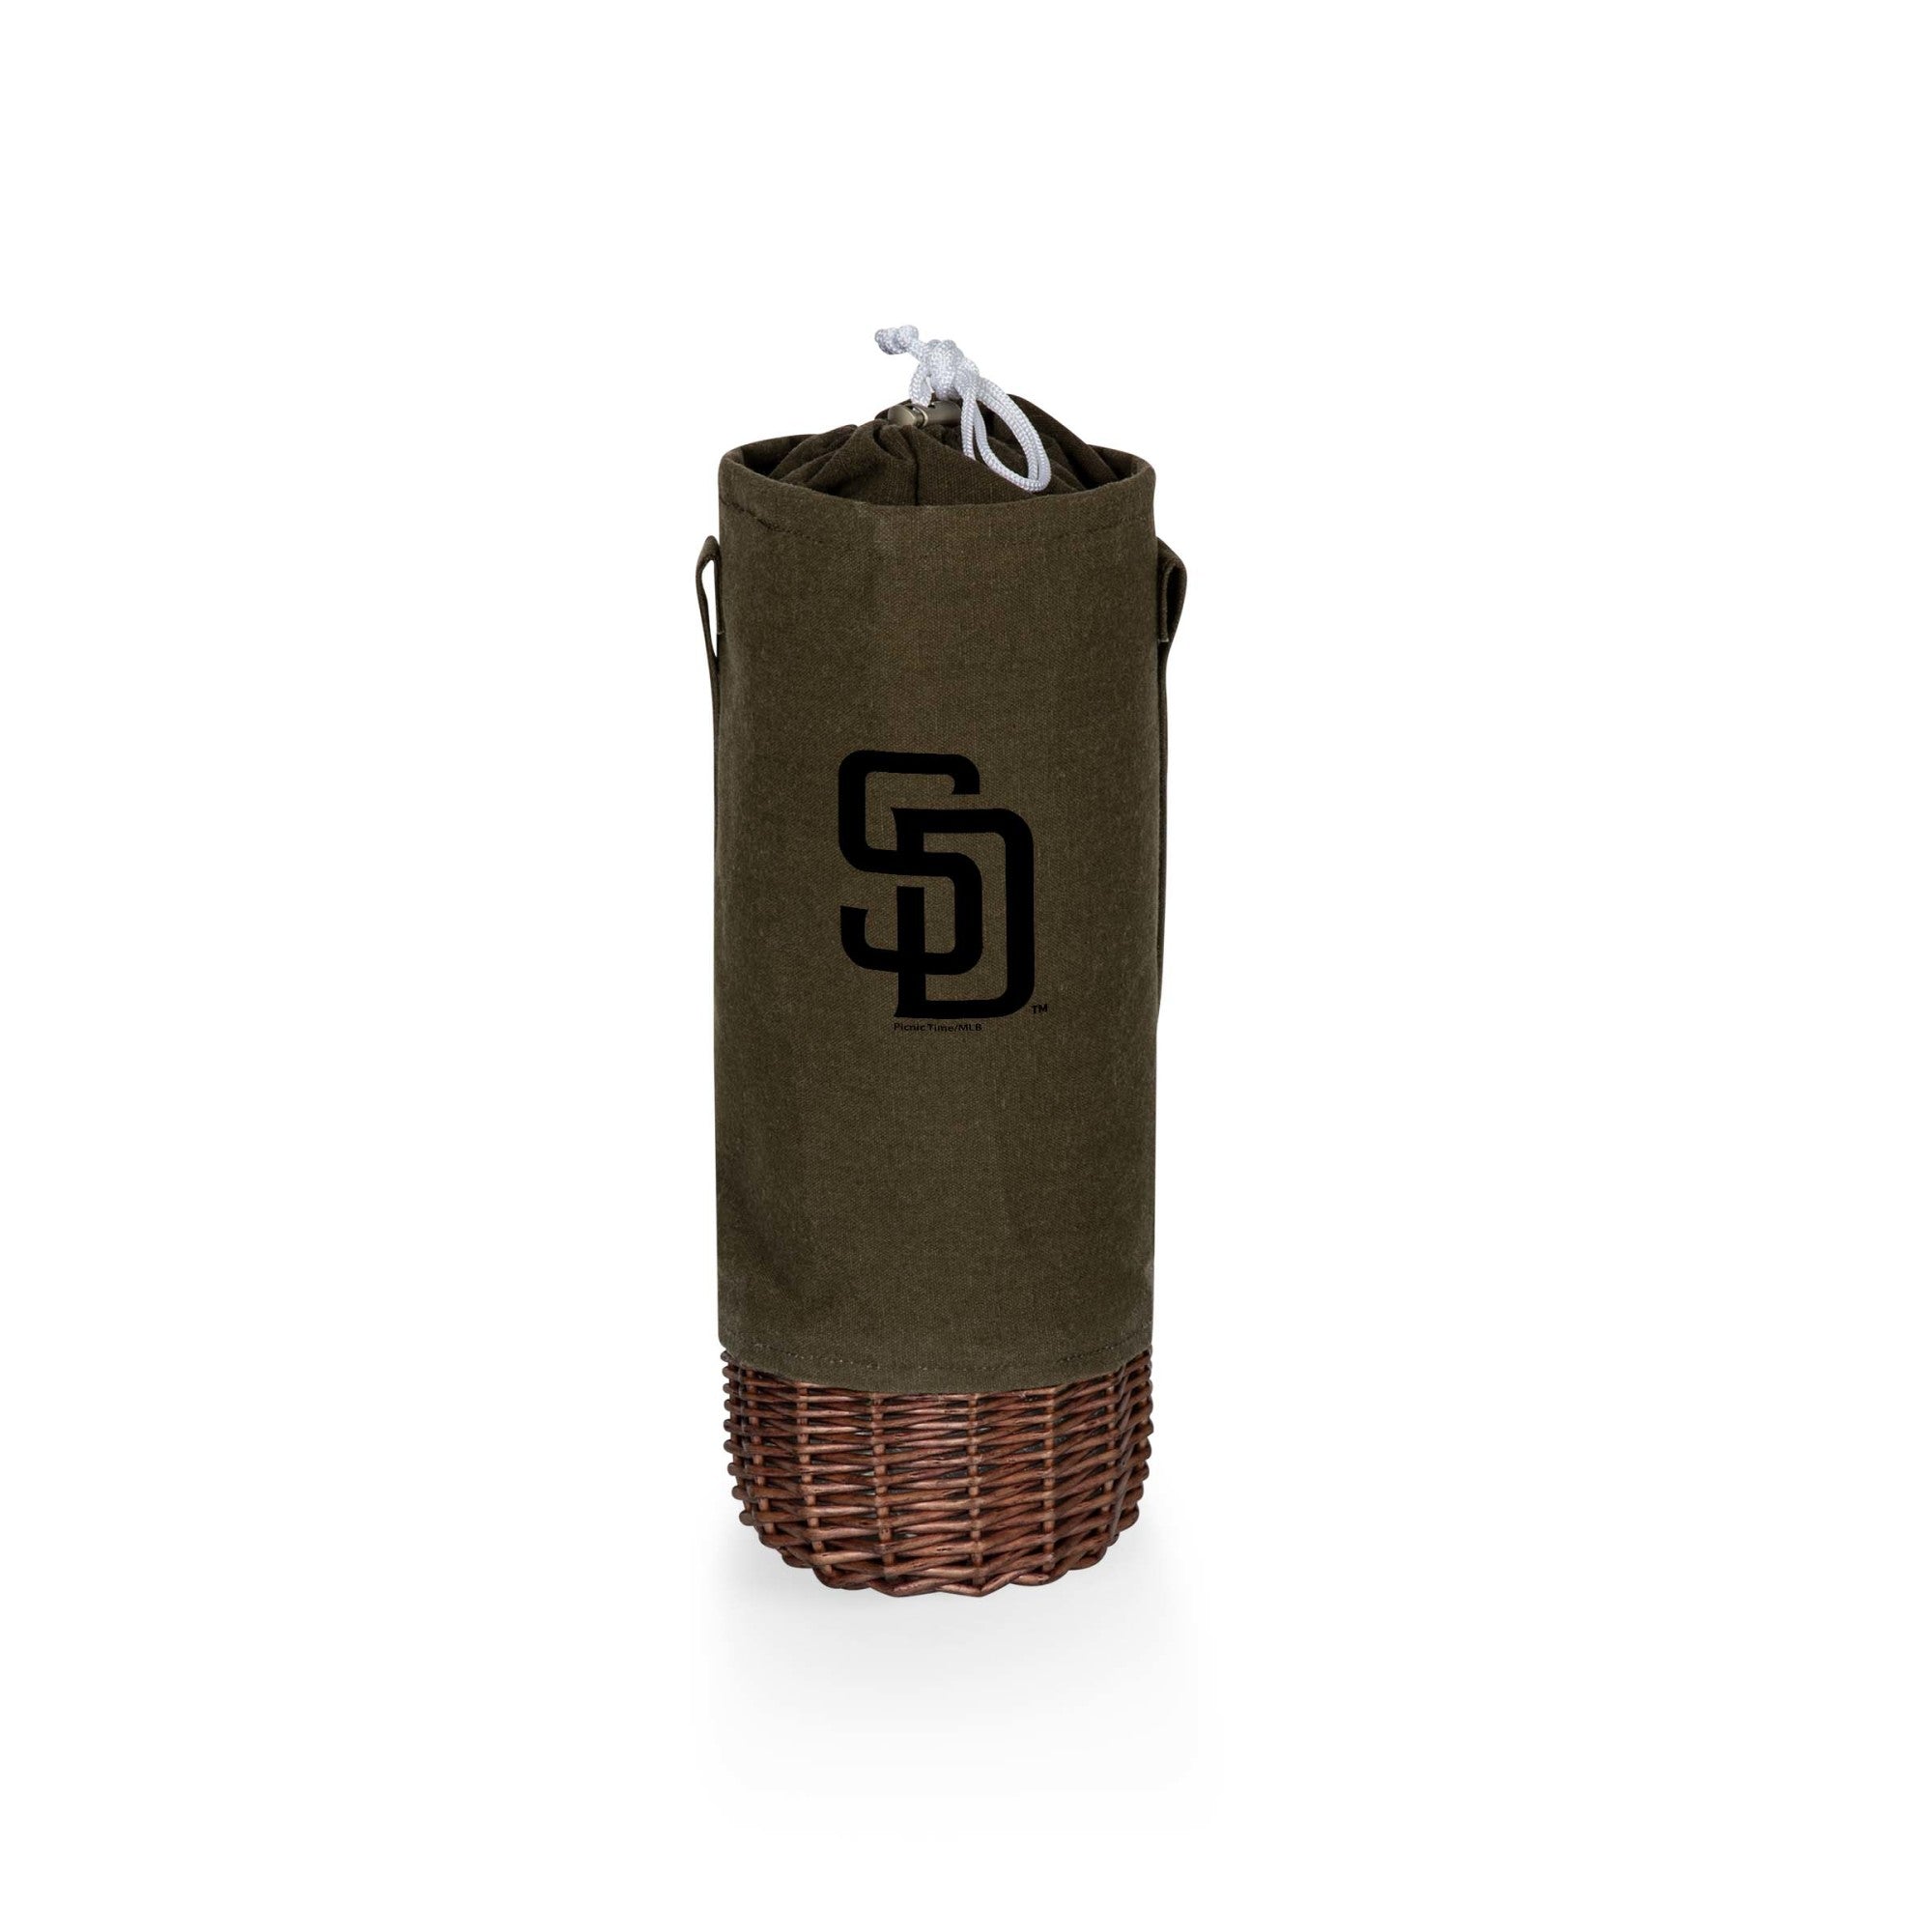 San Diego Padres - Malbec Insulated Canvas and Willow Wine Bottle Basket